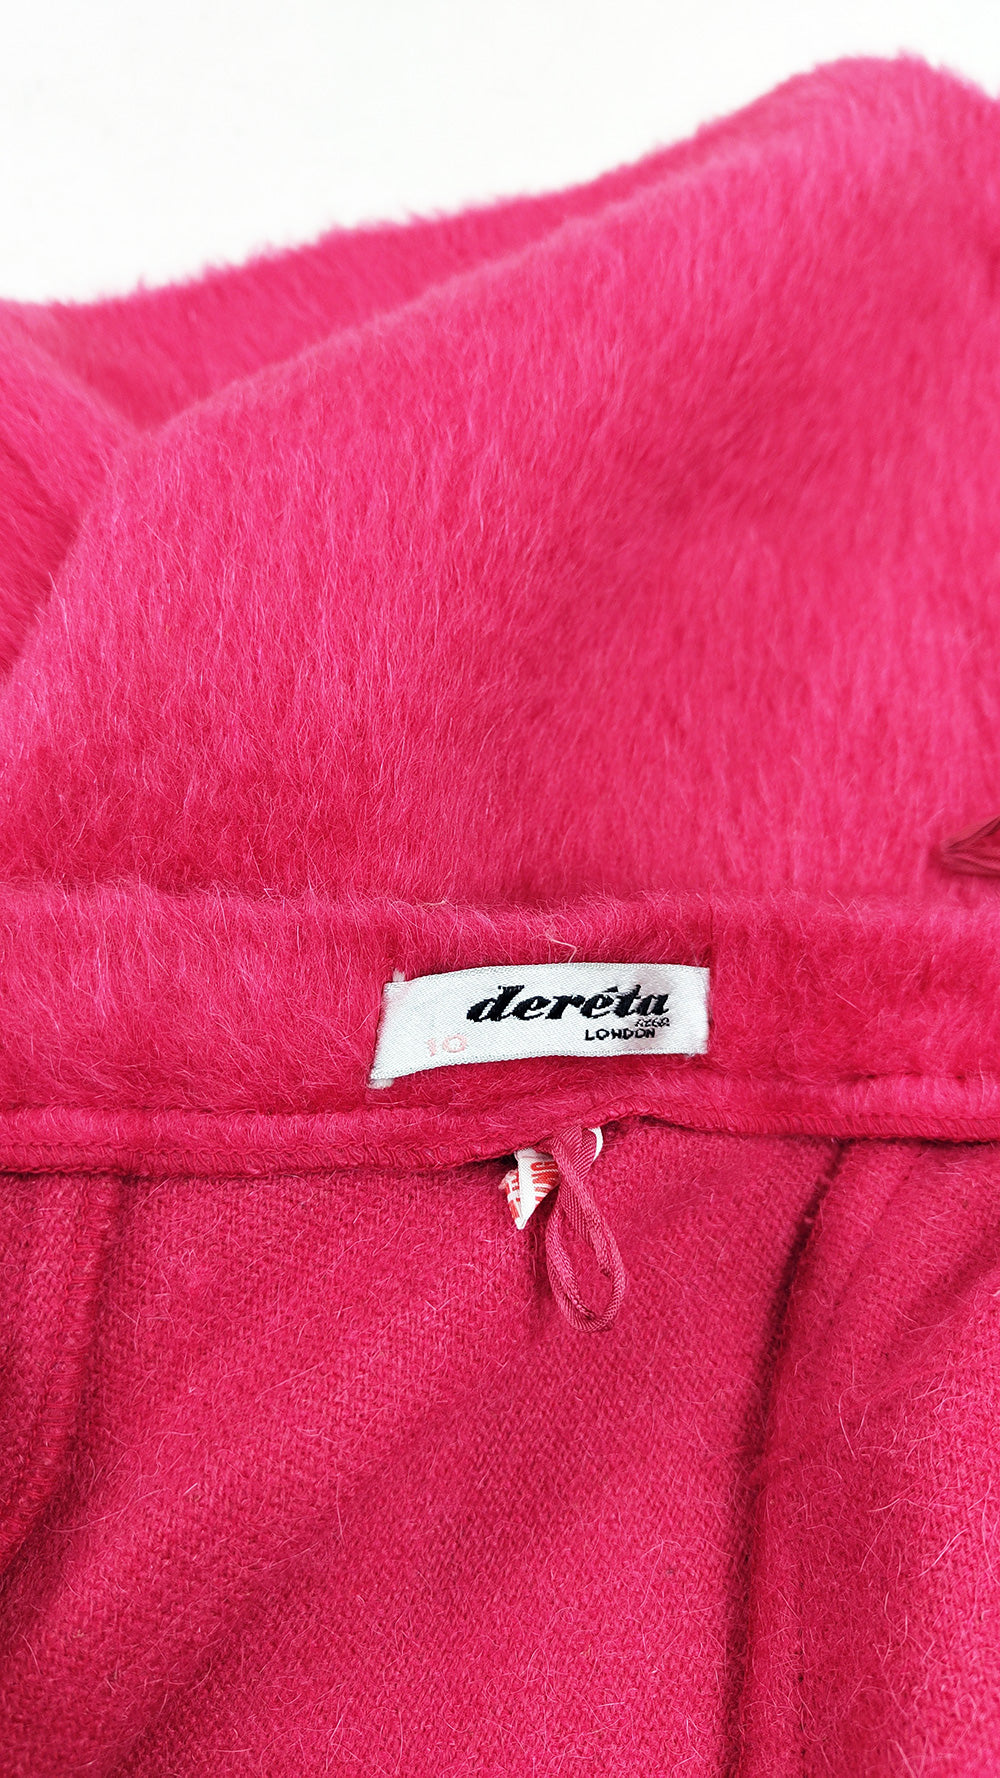 Vintage 60s Furry Raspberry Pink Wool A Line Skirt, 1960s